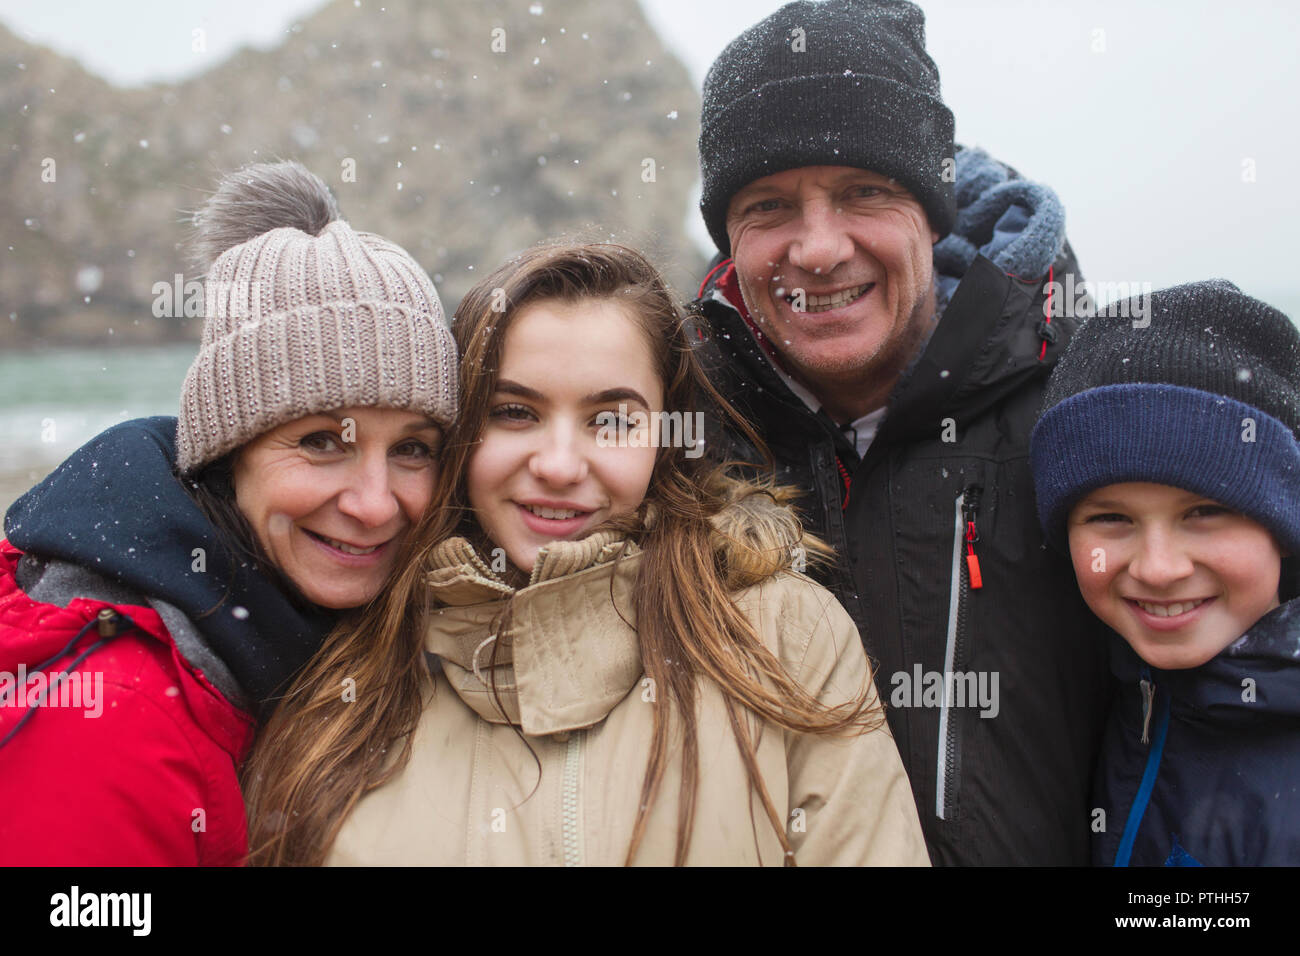 Snow falling over smiling family posing in warm clothing Stock Photo